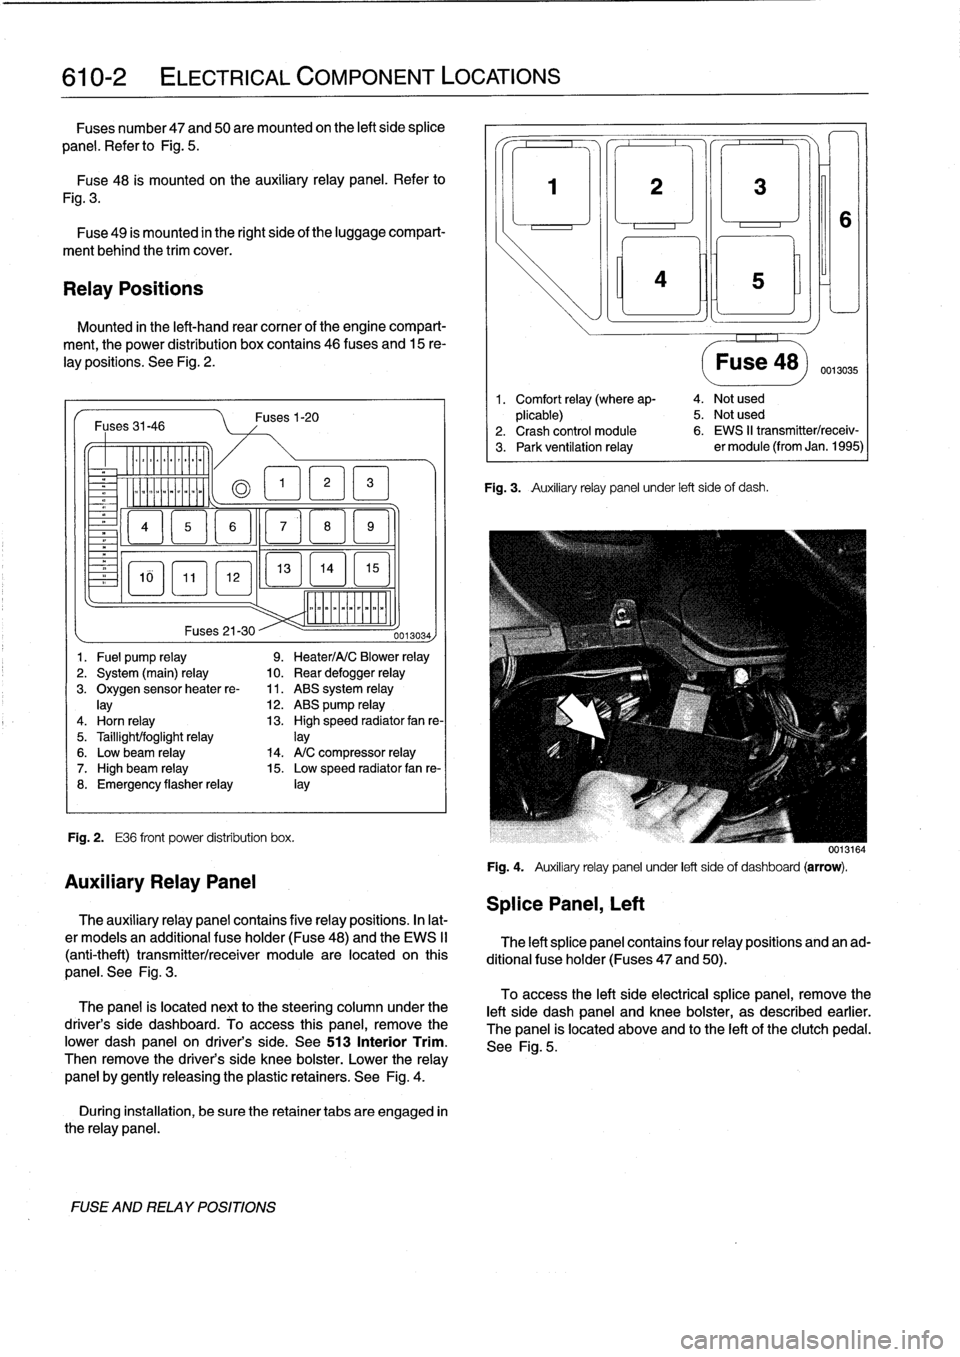 BMW 318i 1997 E36 Workshop Manual 
610-2

	

ELECTRICAL
COMPONENT
LOCATIONS

Fuses
number47
and
50are
mounted
on
the
left
side
splice

panel
.
Refer
lo
Fig
.
5
.

Fuse48
is
mounted
on
the
auxiliary
relay
panel
.
Refer
to

Fig
.
3
.

F